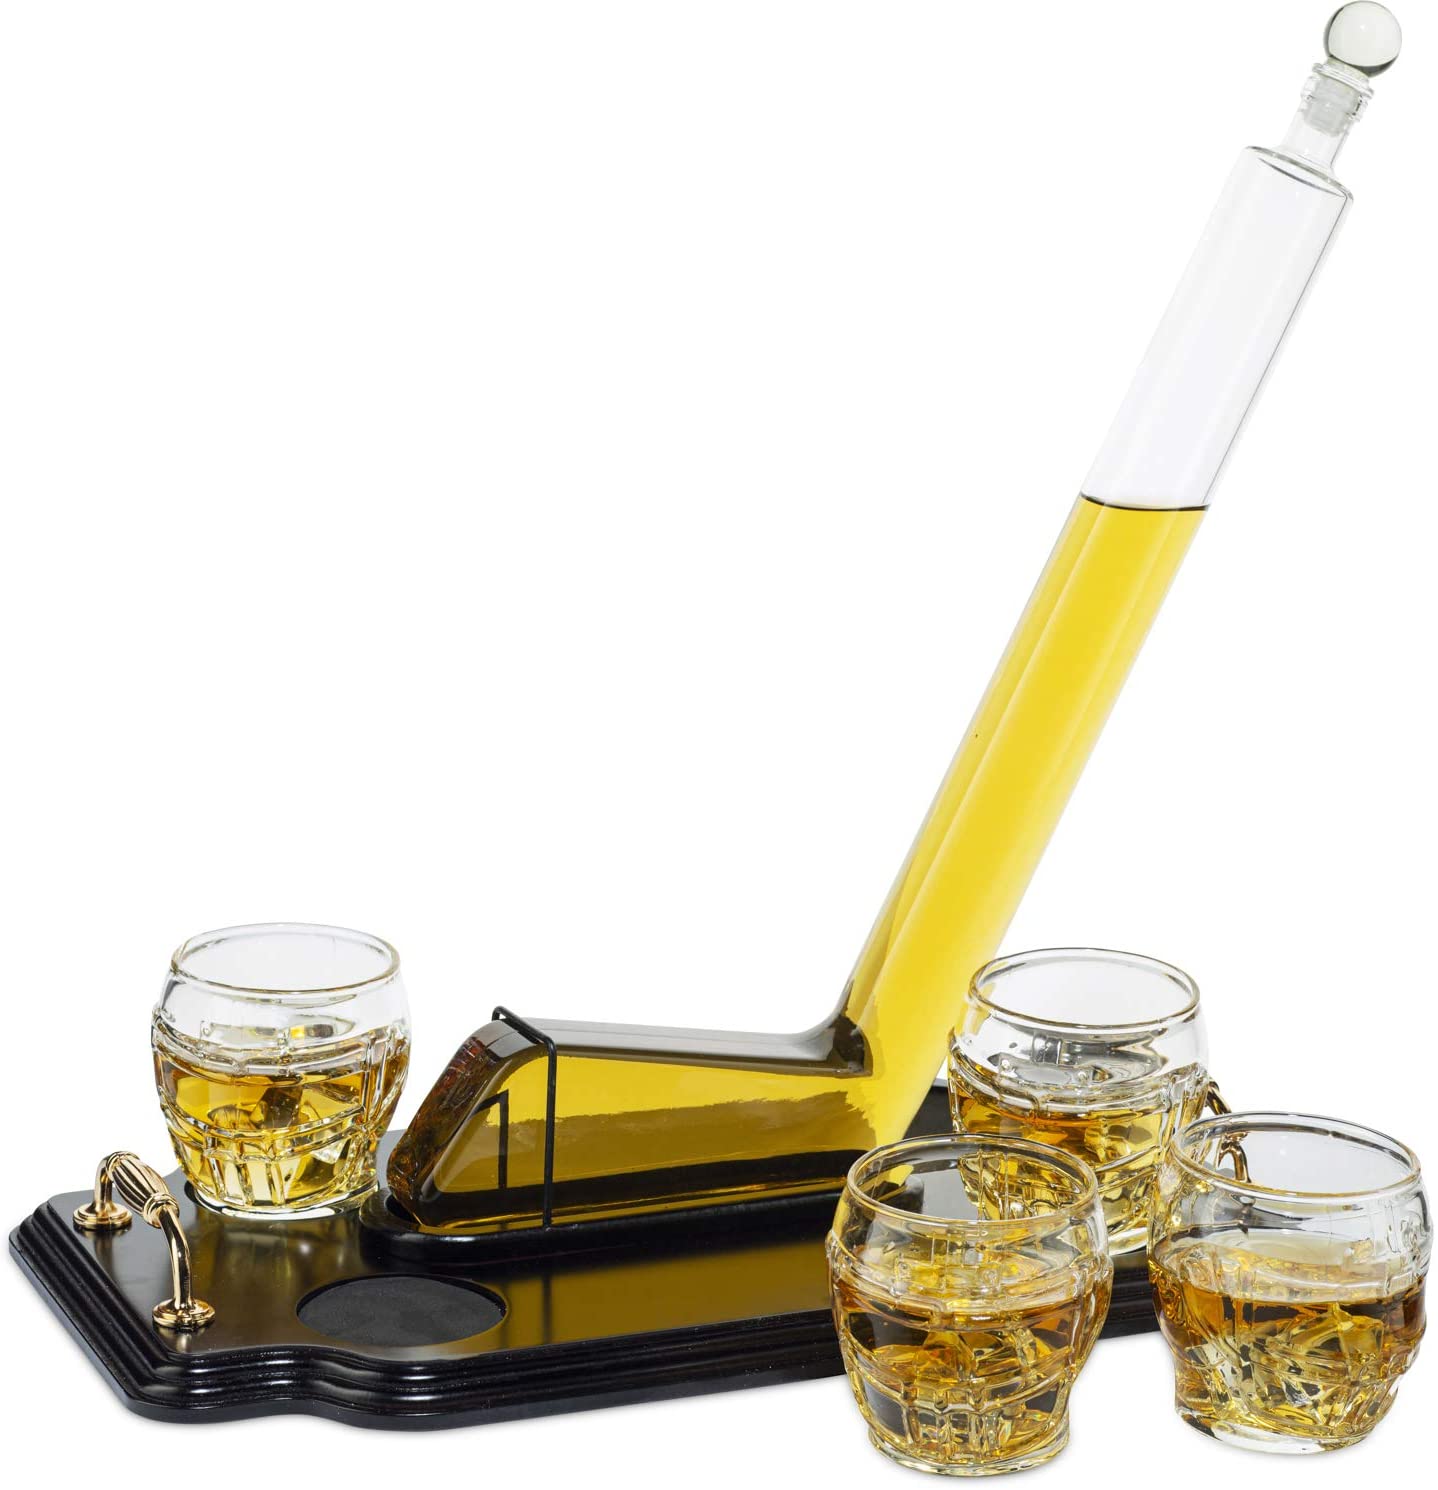 A golf putter decanter and golfing themed drinking glasses set